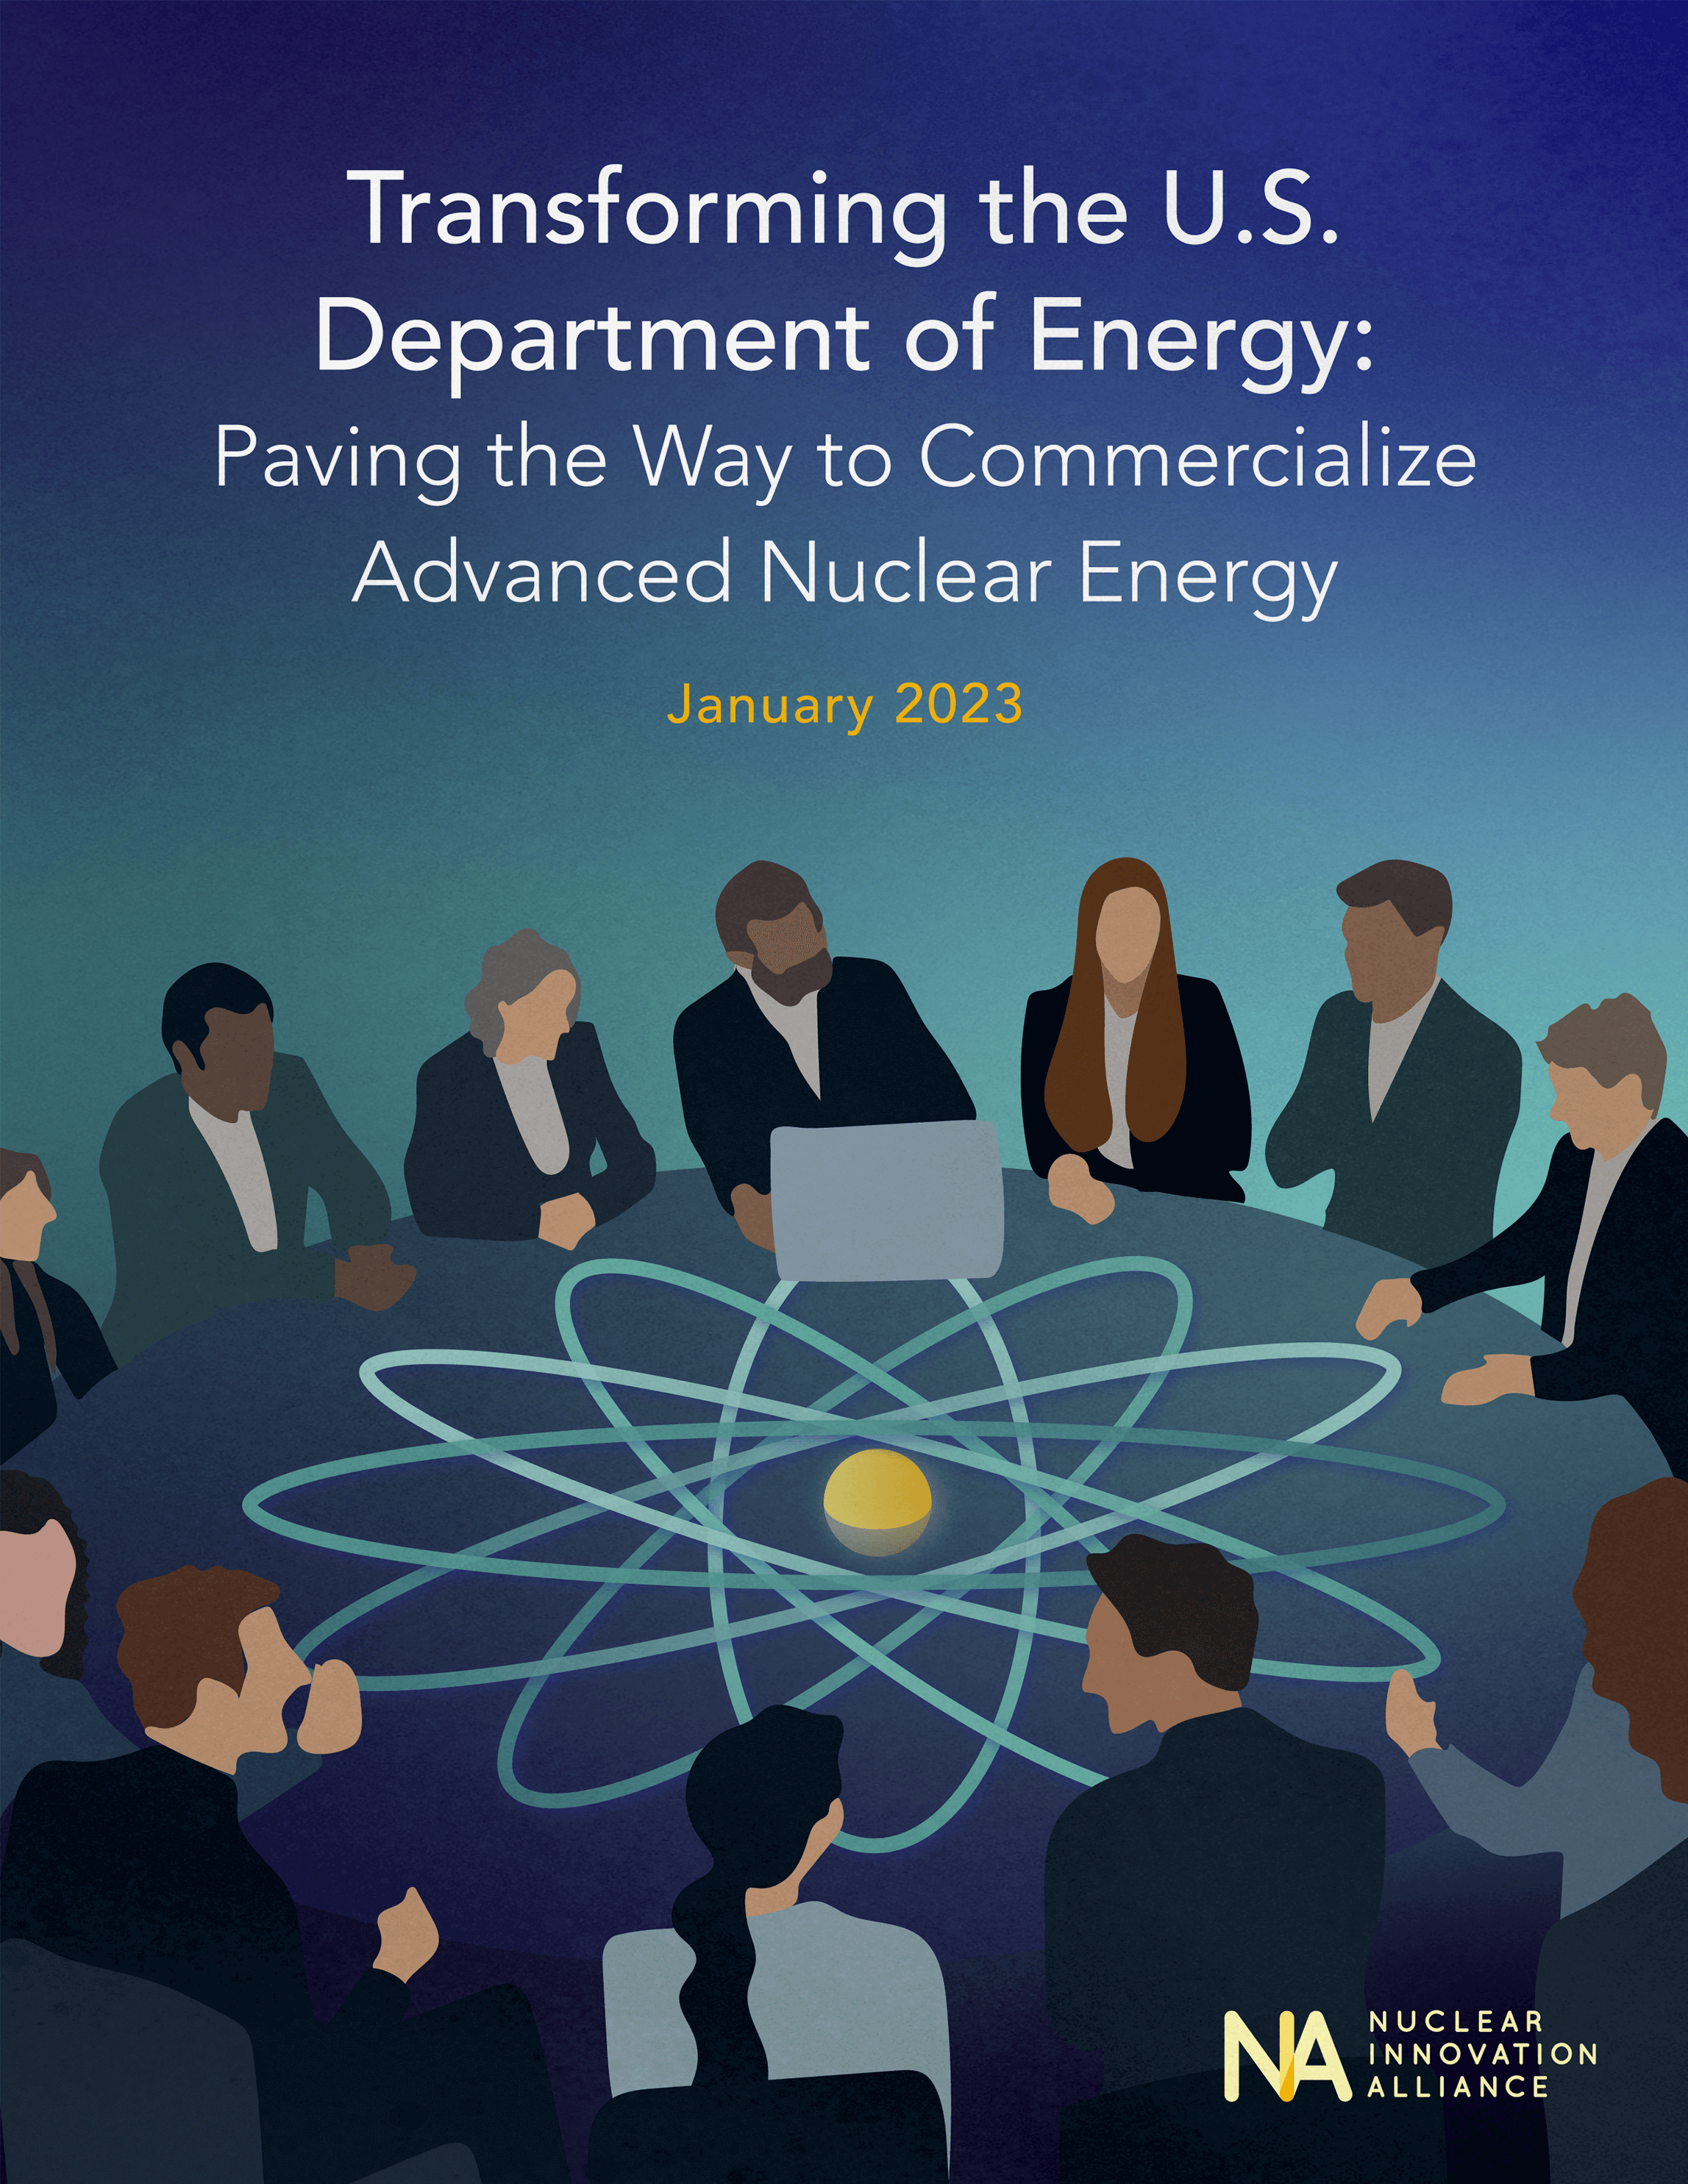 Transforming the U.S. Department of Energy: Paving the Way to Commercialize Advanced Nuclear Energy